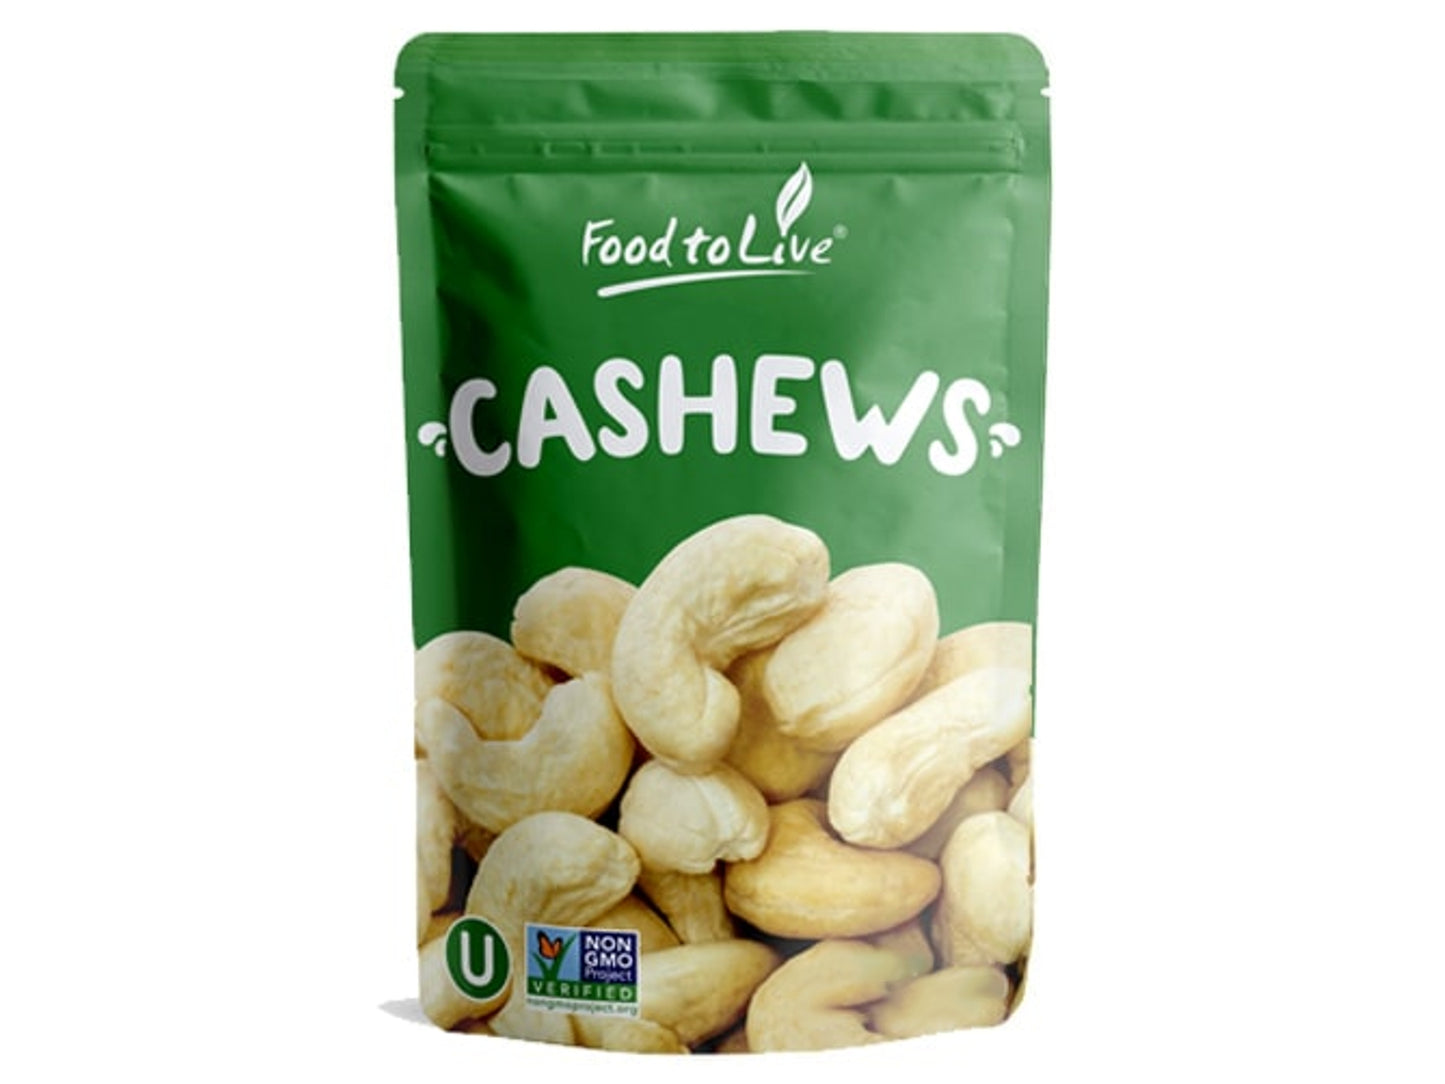 Cashew Nuts - Non-GMO Verified, Large Size W240, Whole Nuts, Unsalted, Kosher, Raw, Vegan, Bulk - by Food to Live